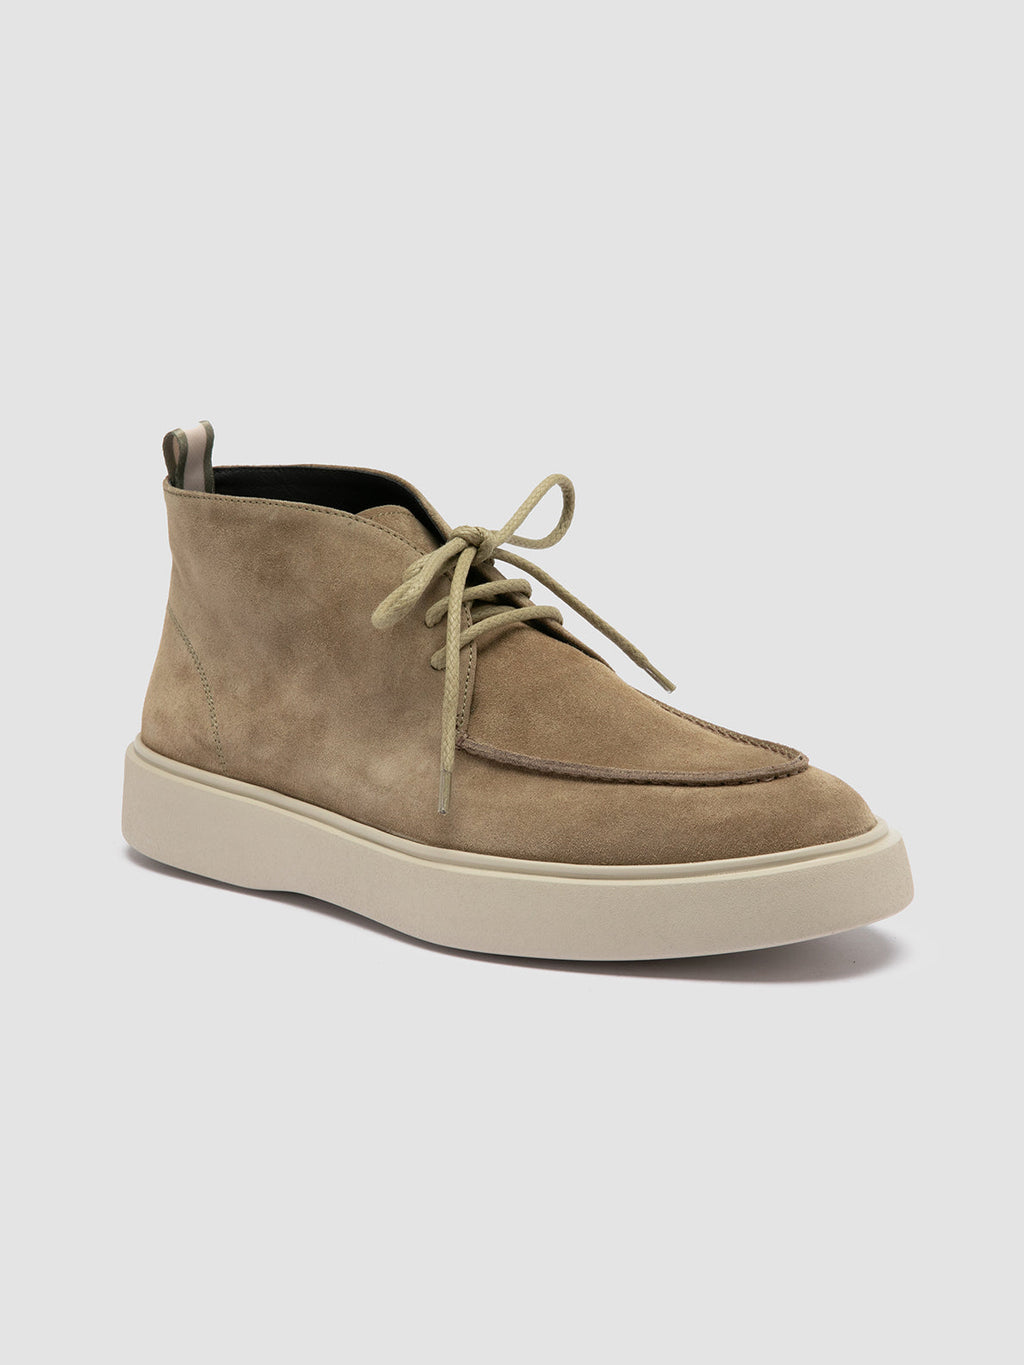 FRAME 002 - Taupe Suede Chukka Boots